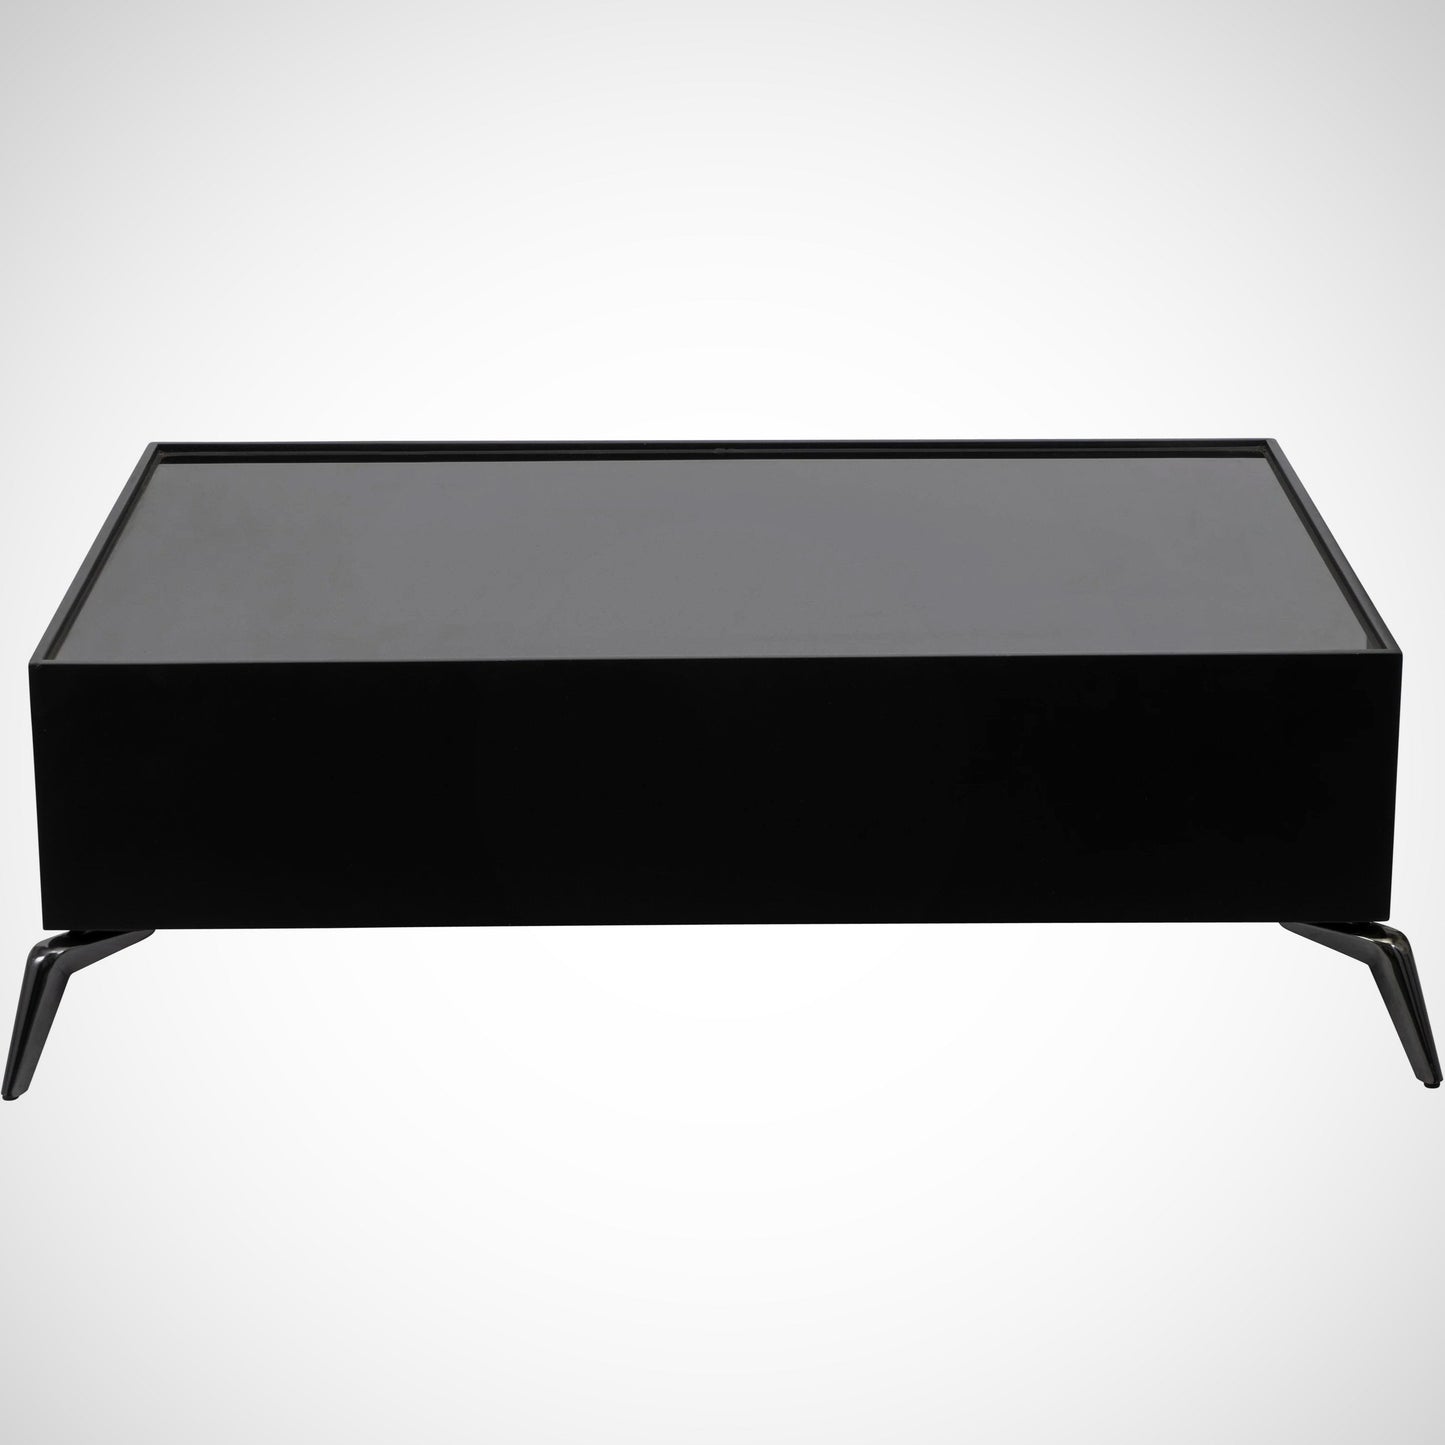 Anleny Coffee Table